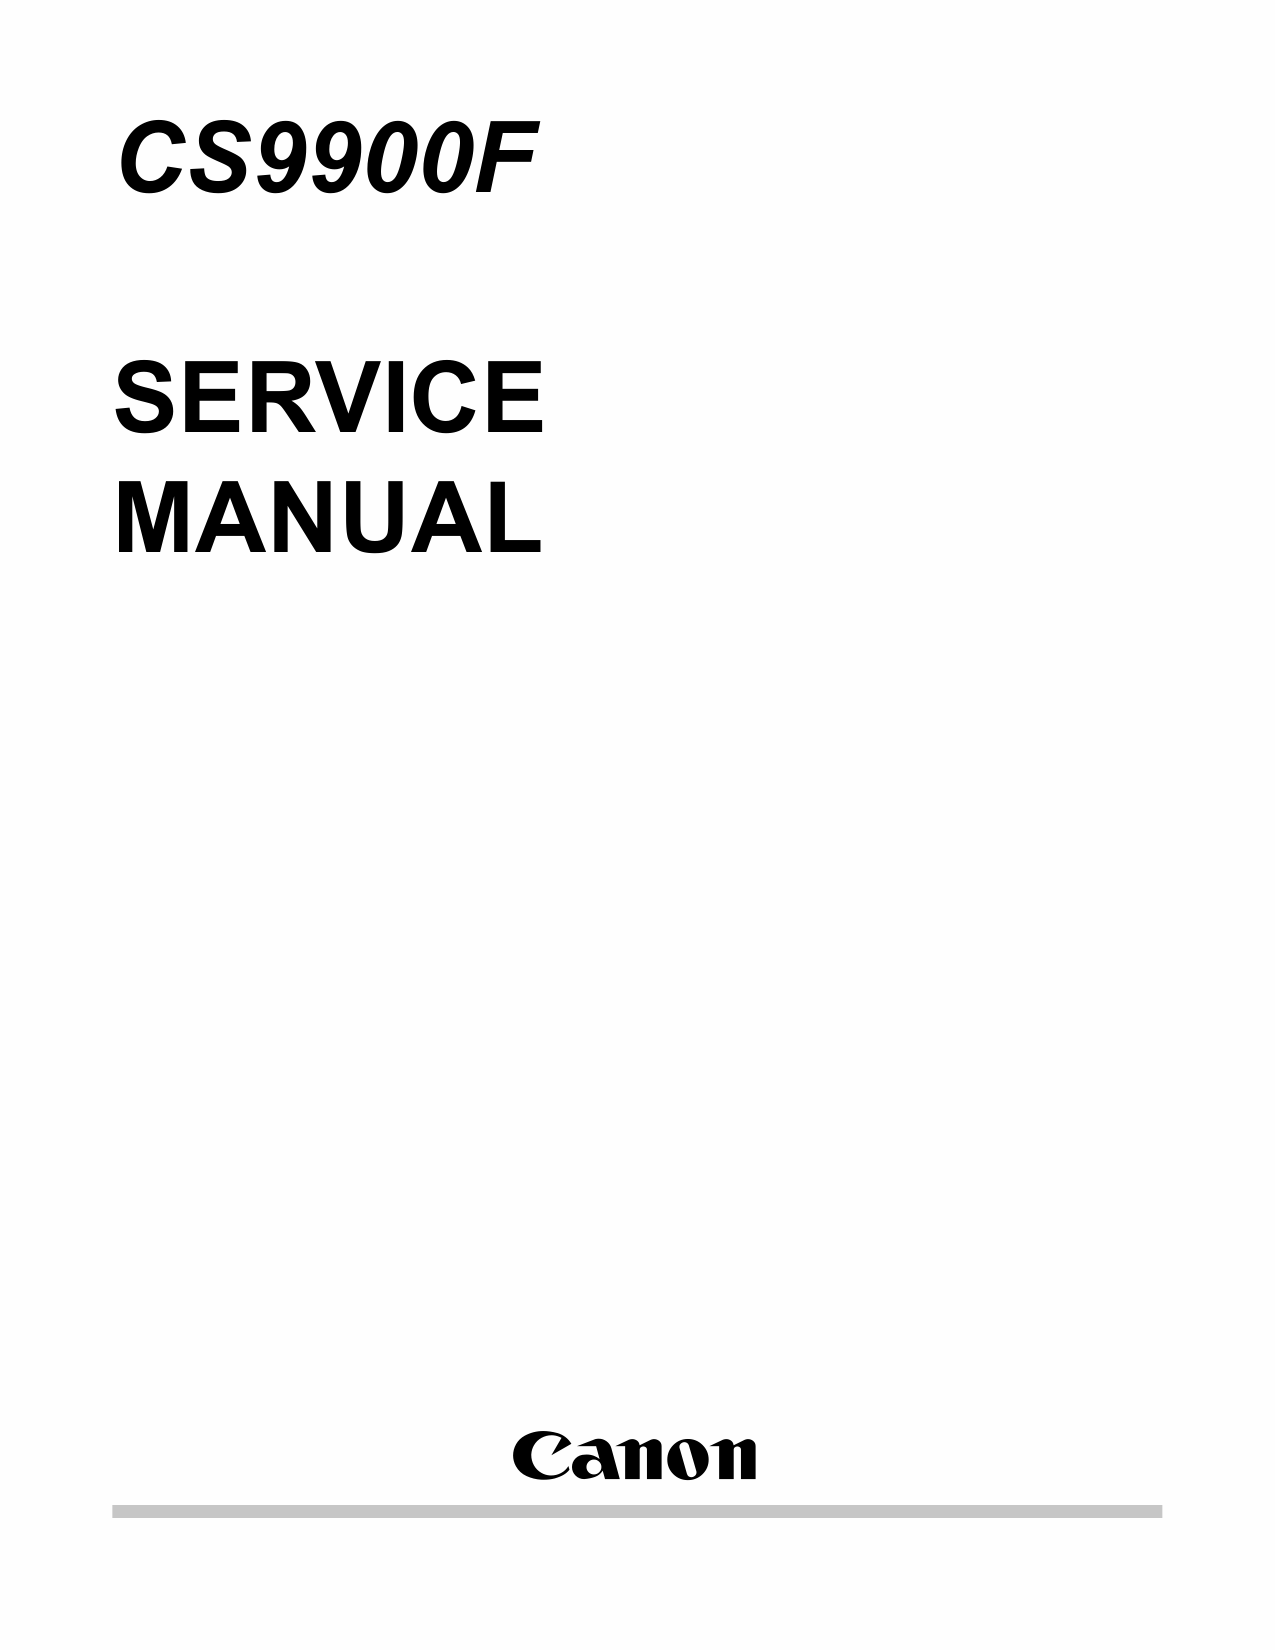 Canon Options CS-9900F Document-Scanner Parts and Service Manual-1